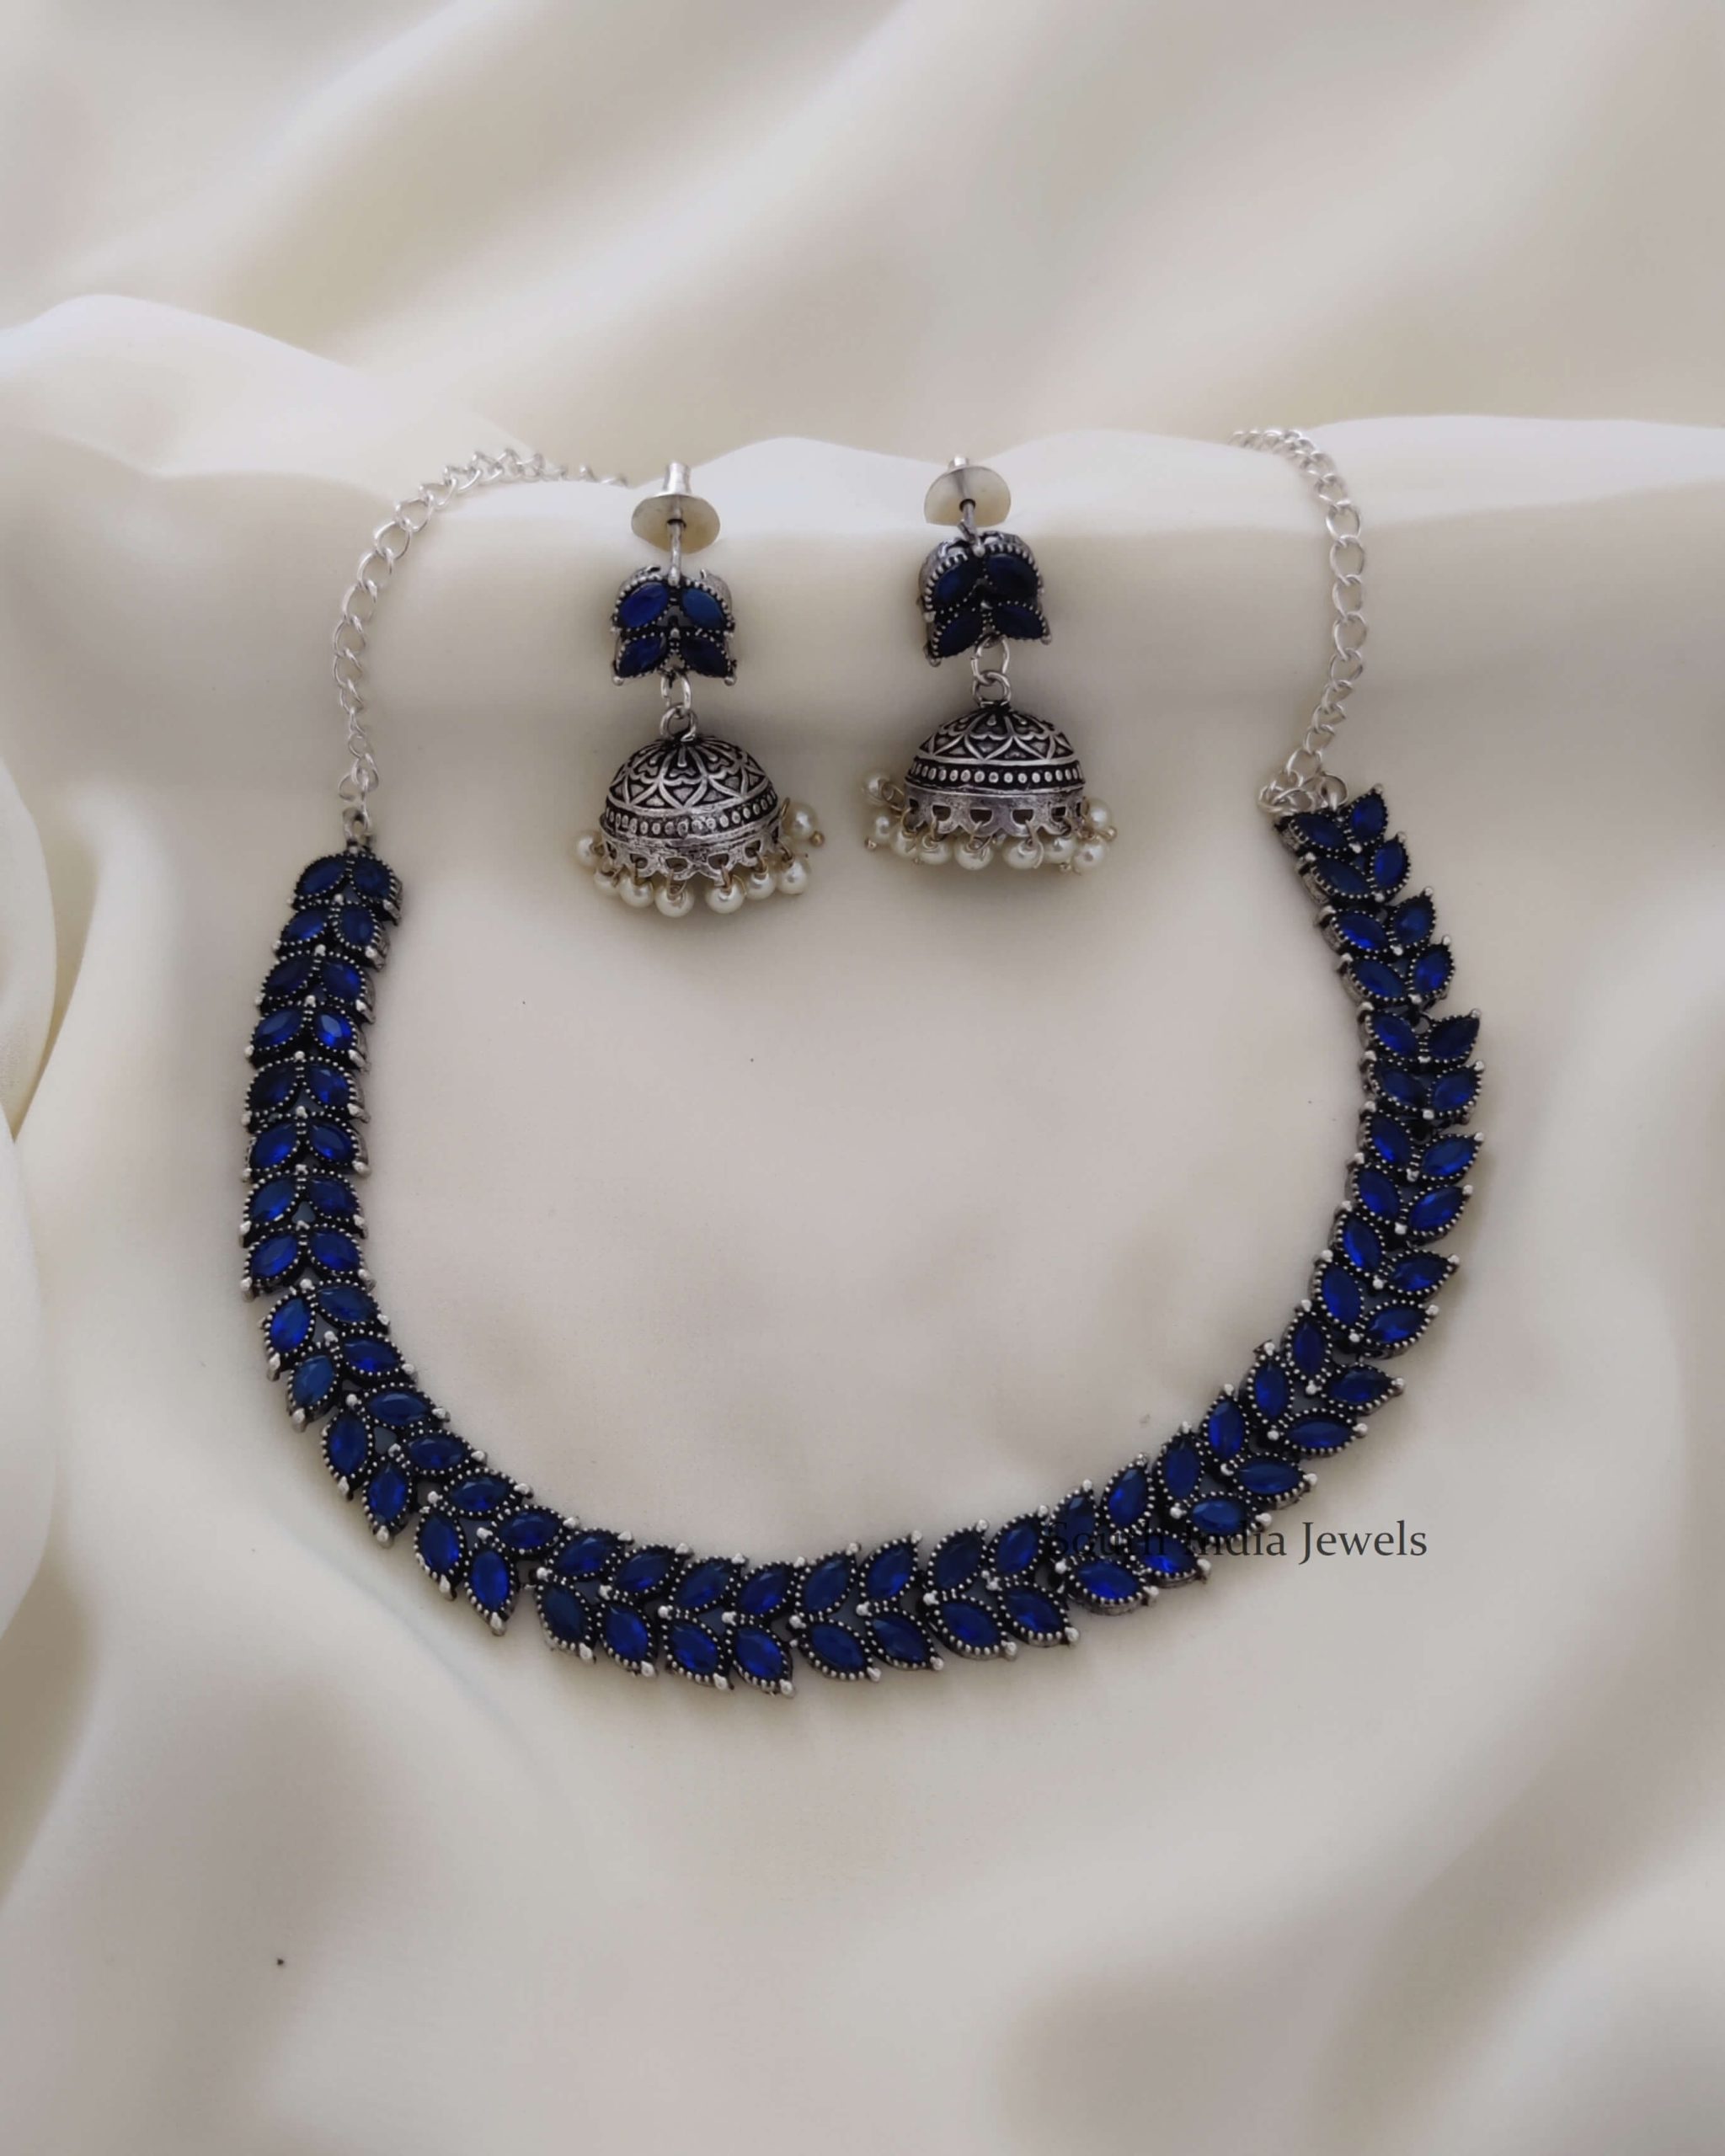 Leaf Design Blue Stone Necklace - South India Jewels